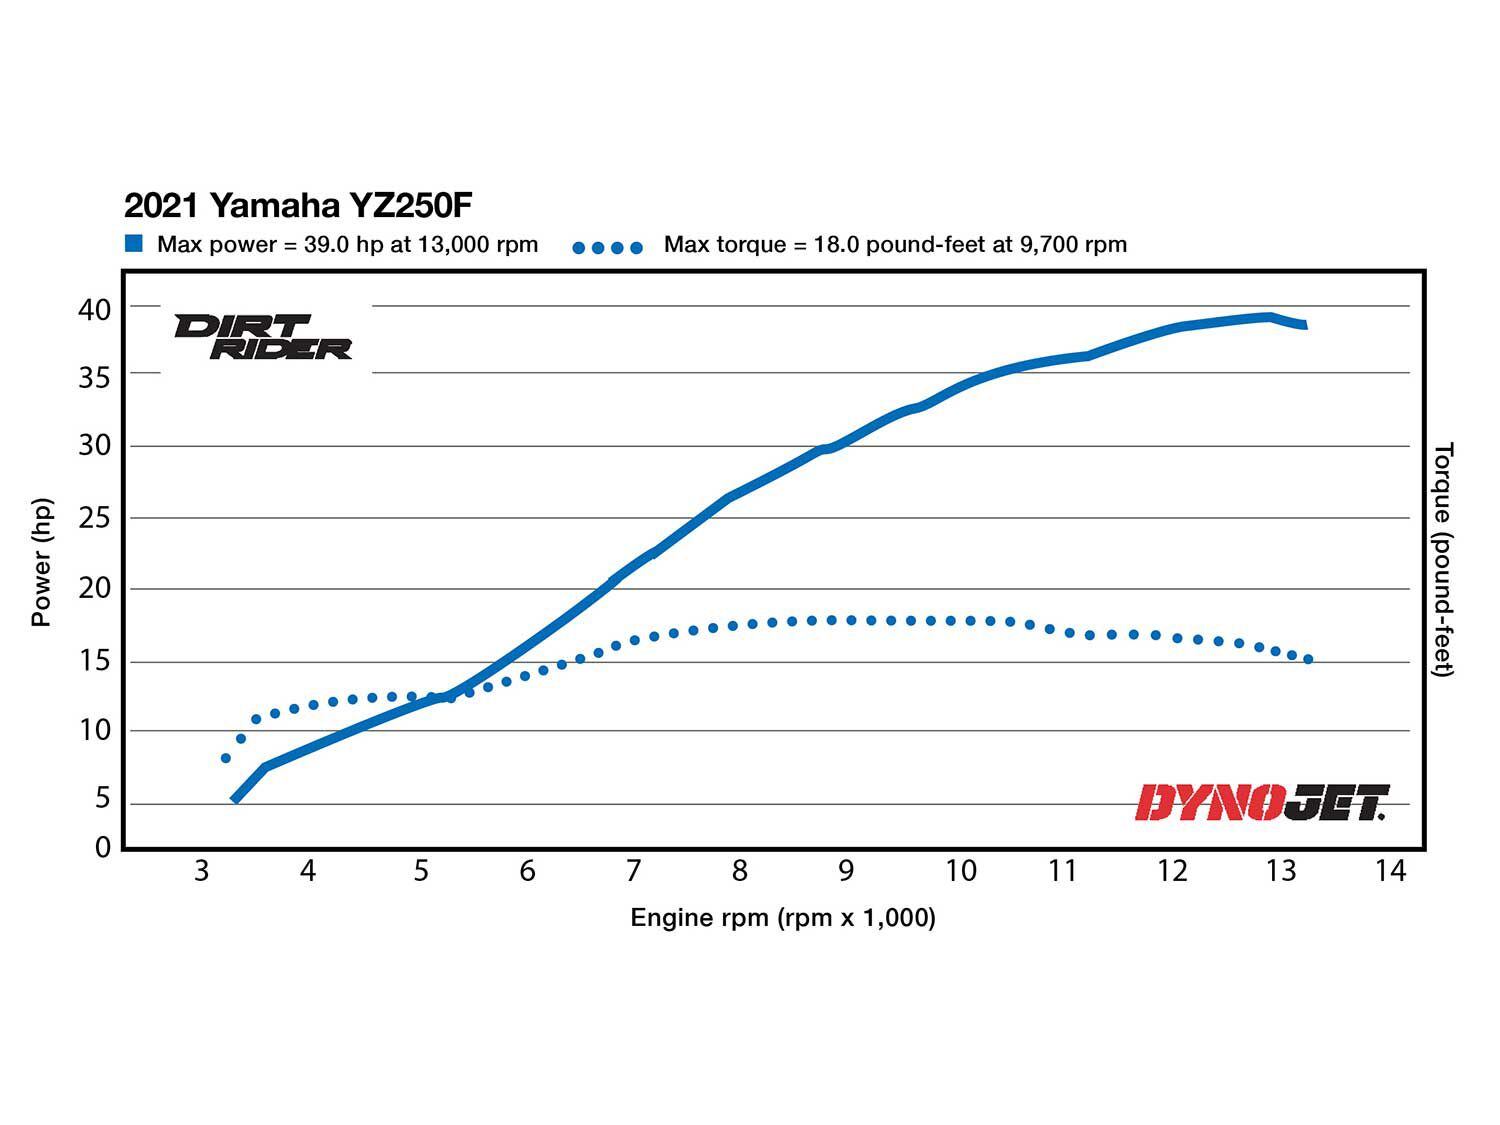 The Yamaha ties the Honda CRF250R for the least peak horsepower of the bikes in this comparison test with 39.0 hp at 13,000 rpm. Its 18.0 pound-feet of torque at 9,700 rpm is the lowest peak figure of the five motorcycles gathered here as well. Despite not being the top performer on the dyno, the bLU cRU’s engine is remarkable on the track.